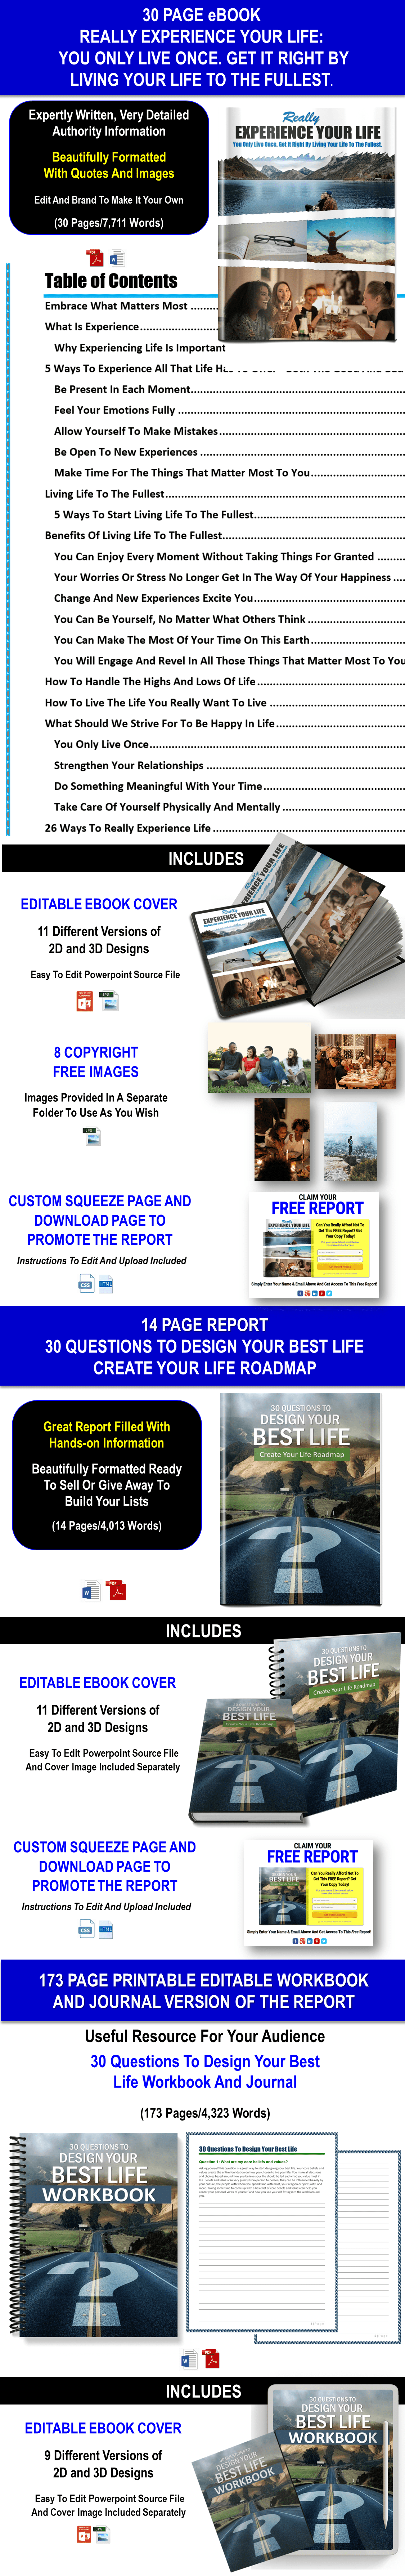 Really Experience Your Life And Live Life To The Fullest Content with PLR Rights